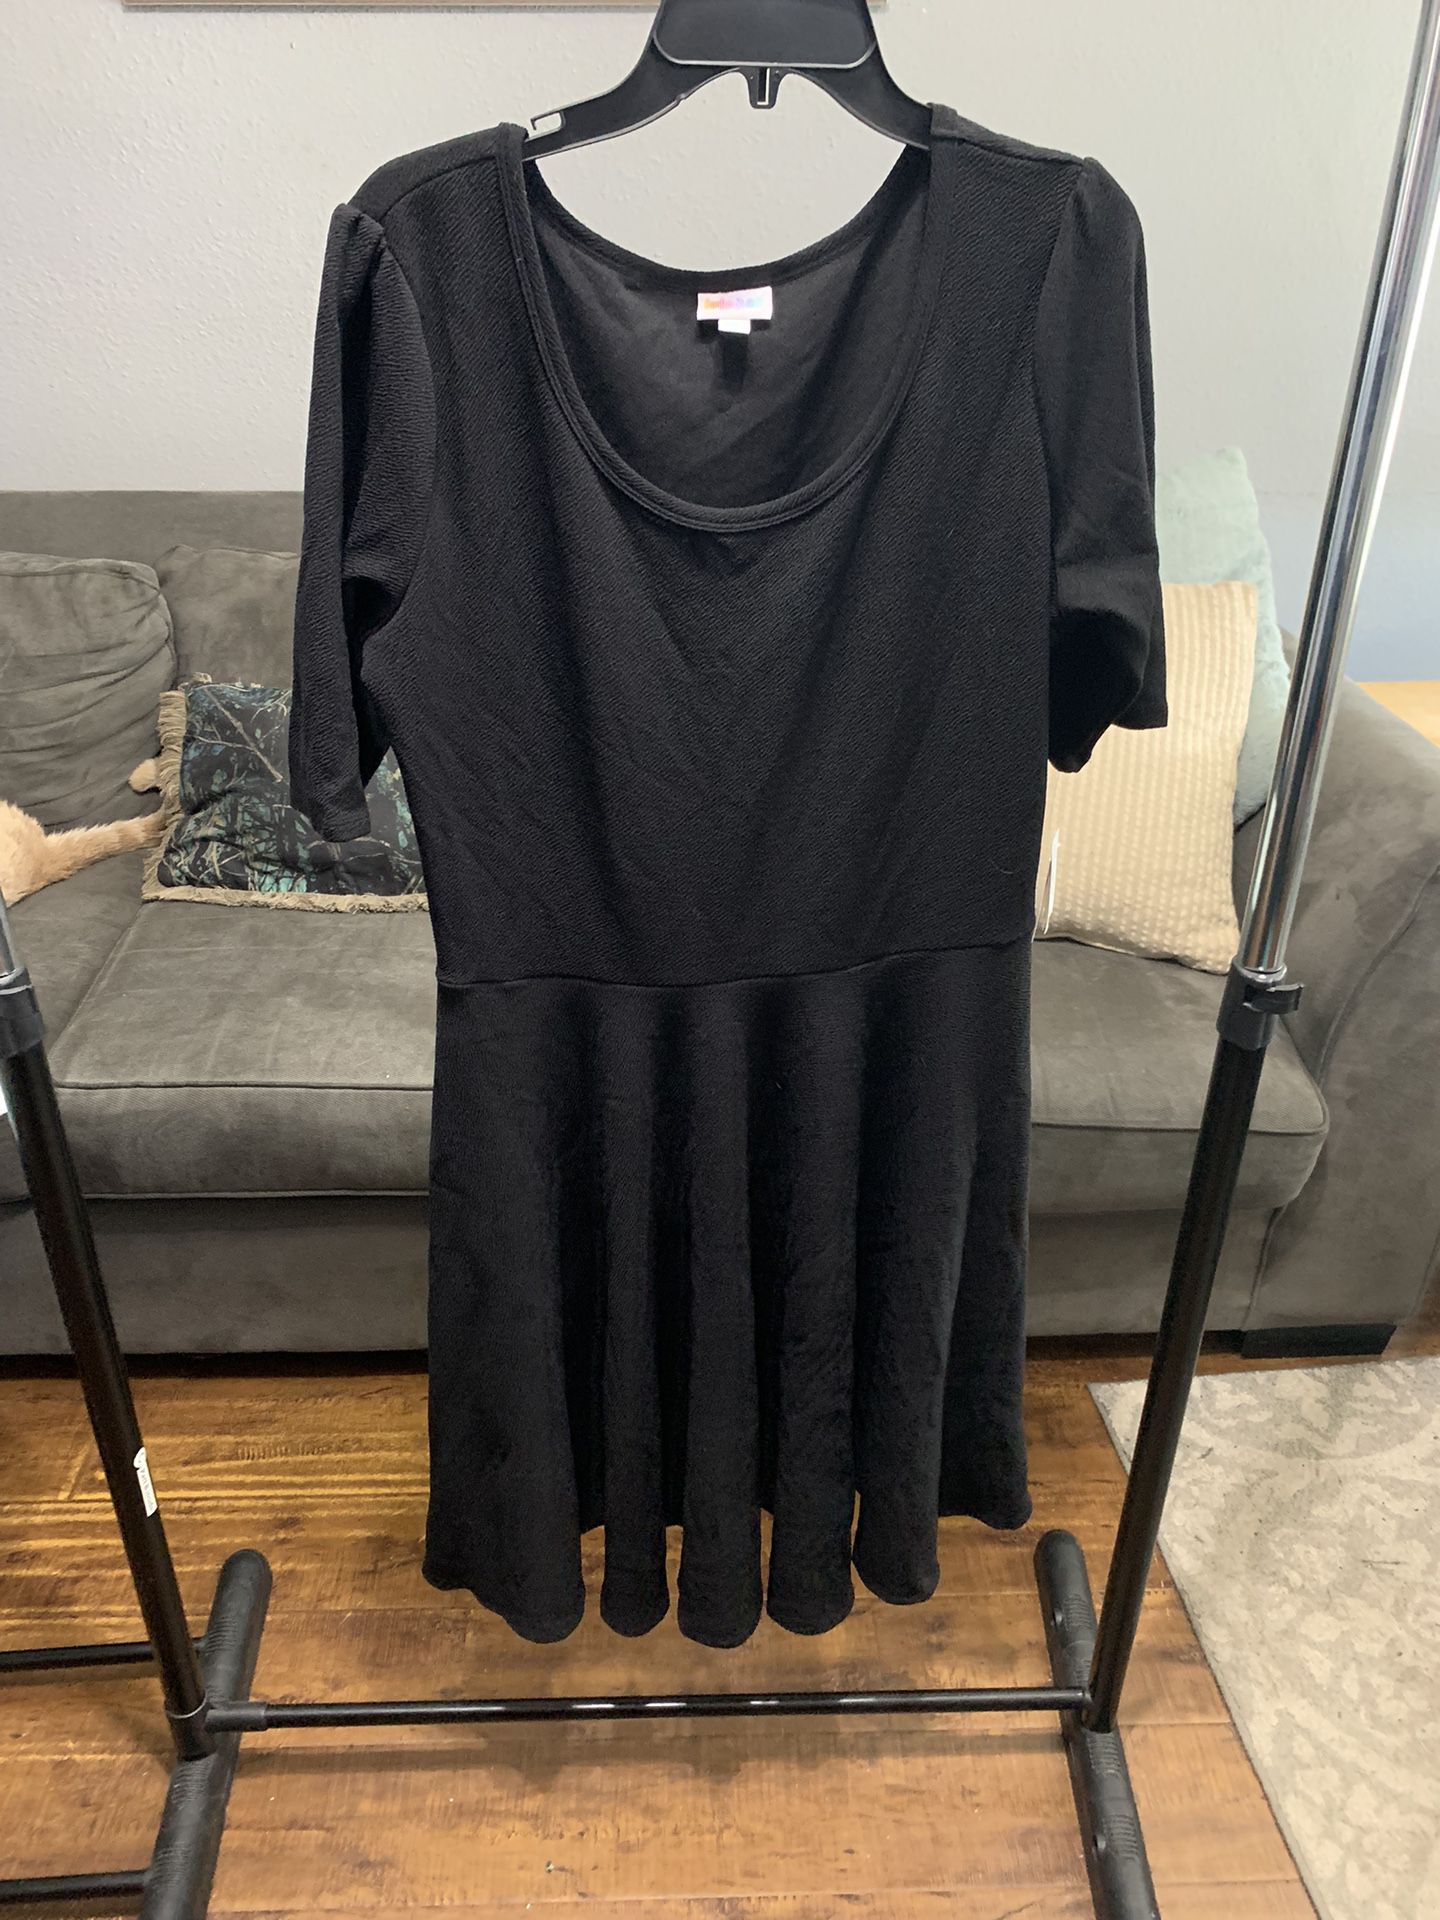 Lularoe Brand New With Tags